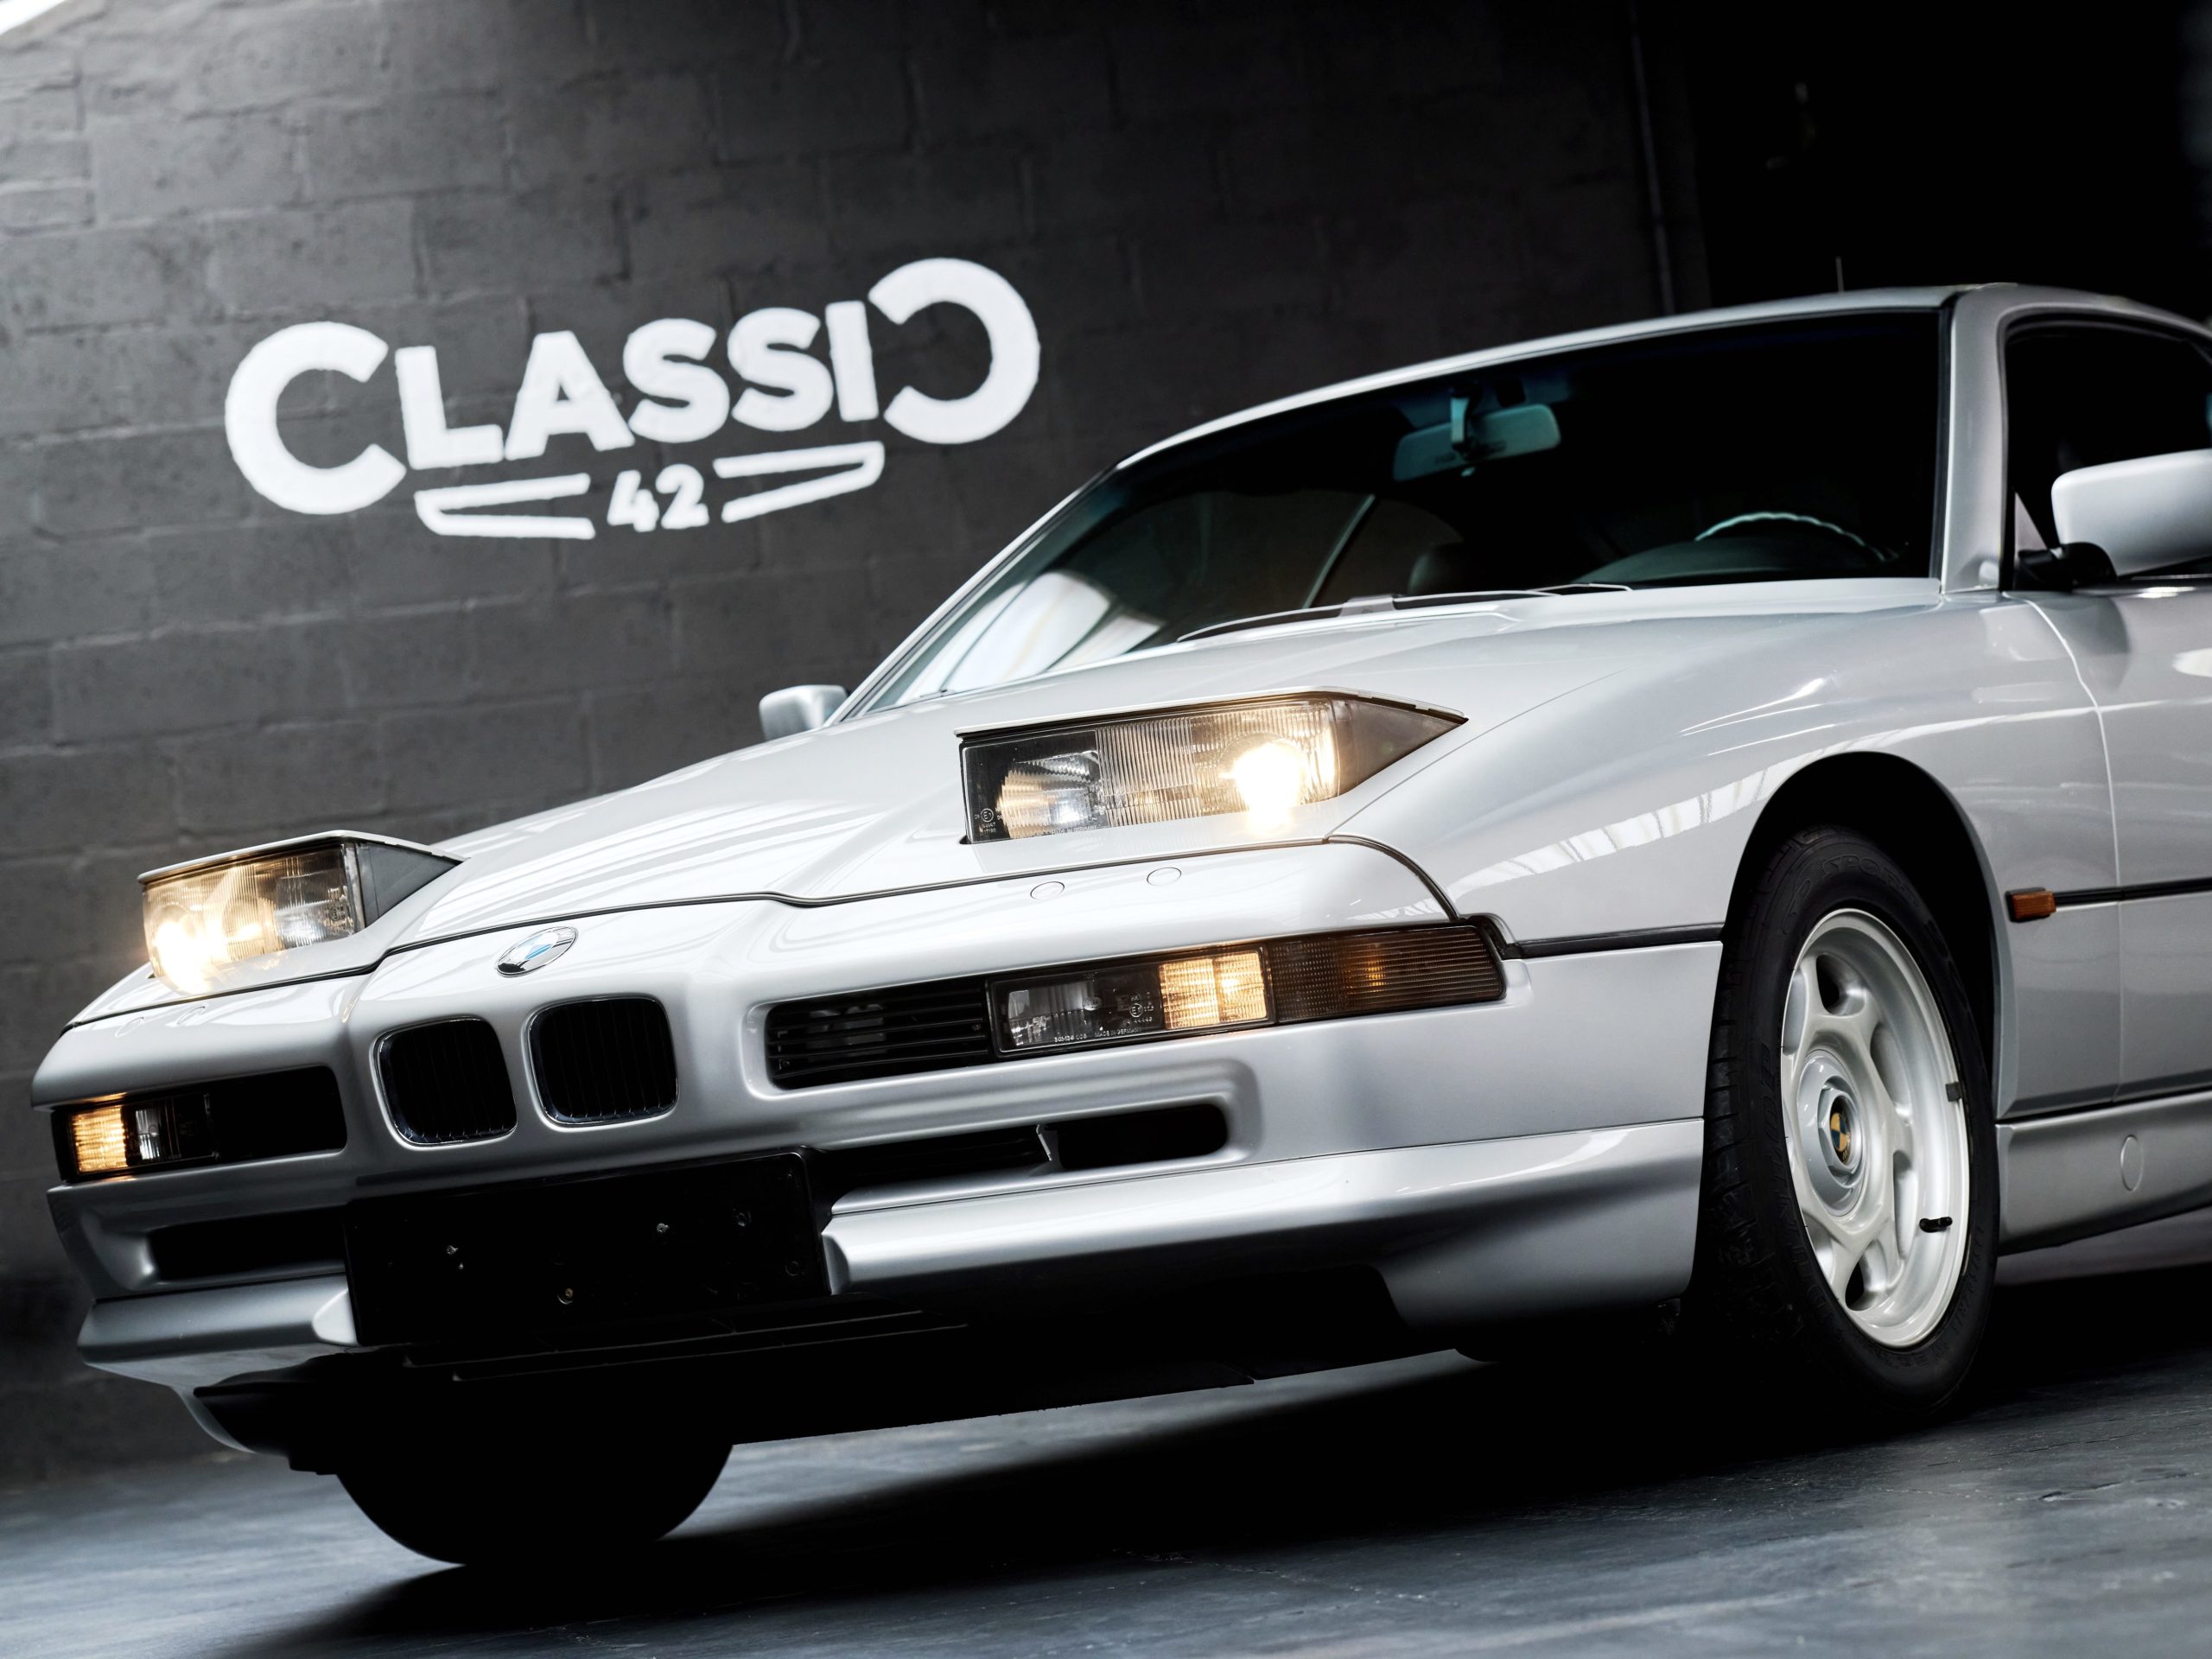 front view of a 1991 BMW 850i 6 speed manual for sale with Classic 42 Belgium